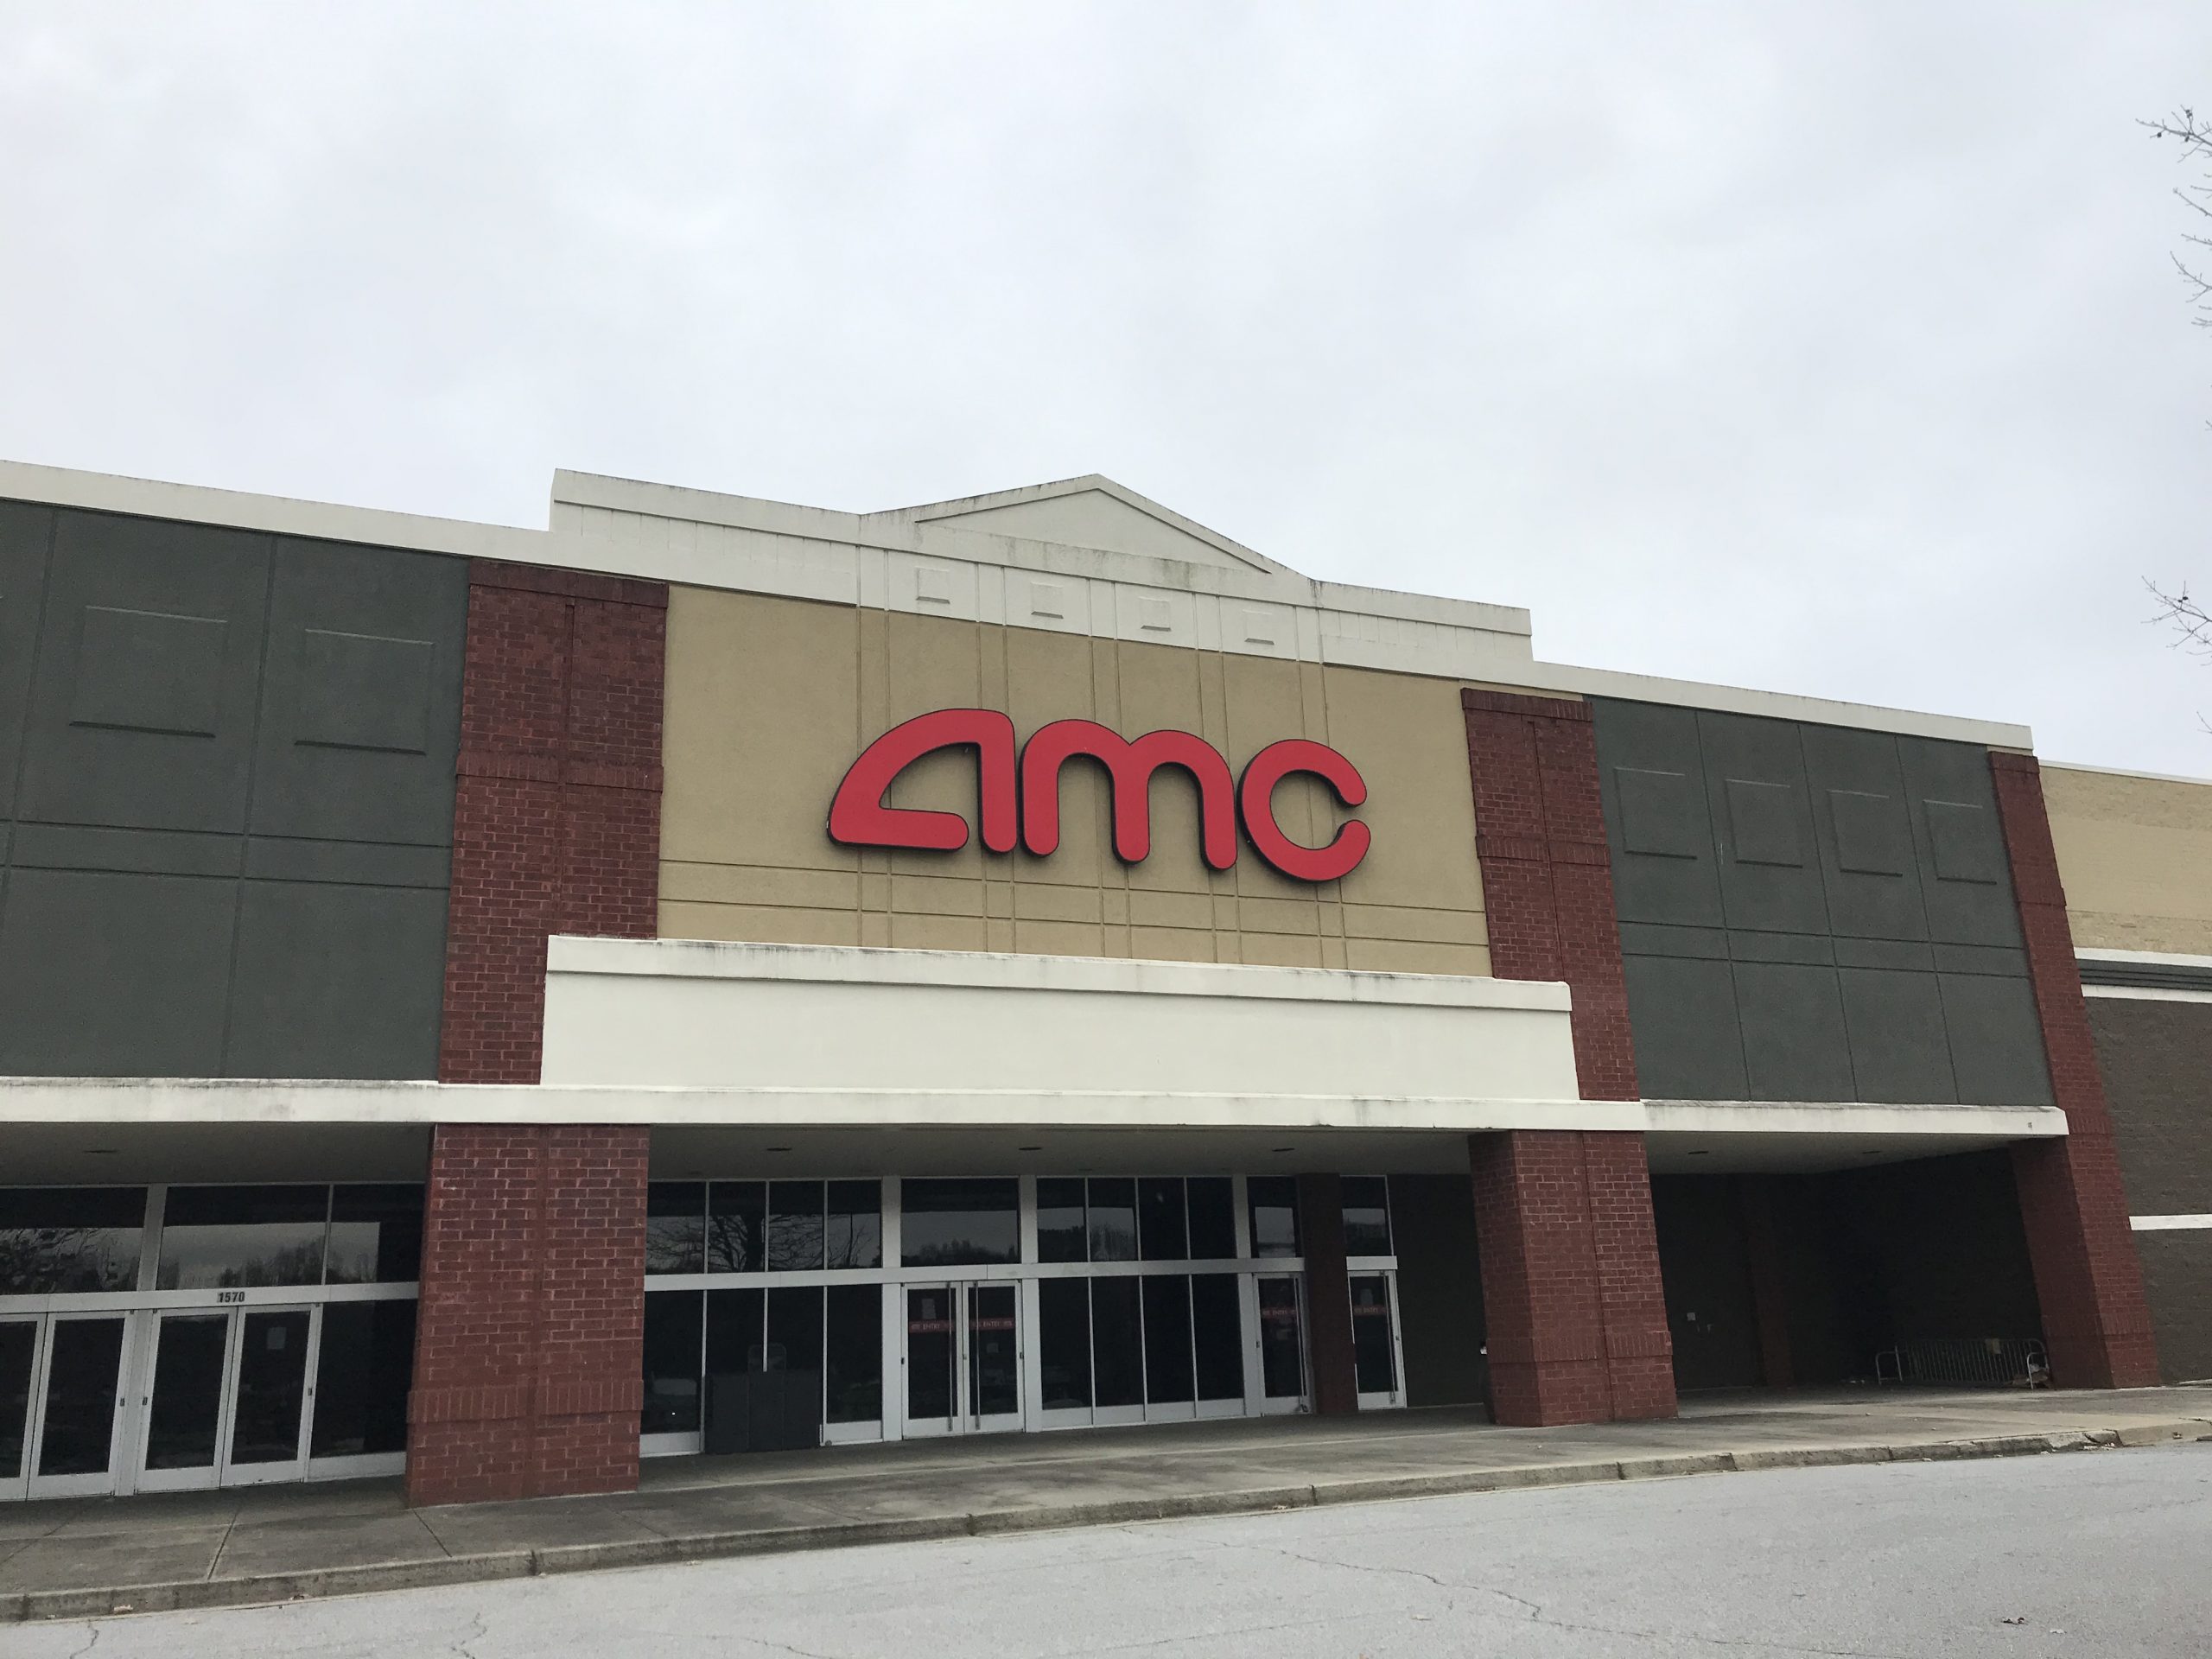 Movie Theater Industry Works To Pivot Stay Afloat During Covid-19 Grady Newsource